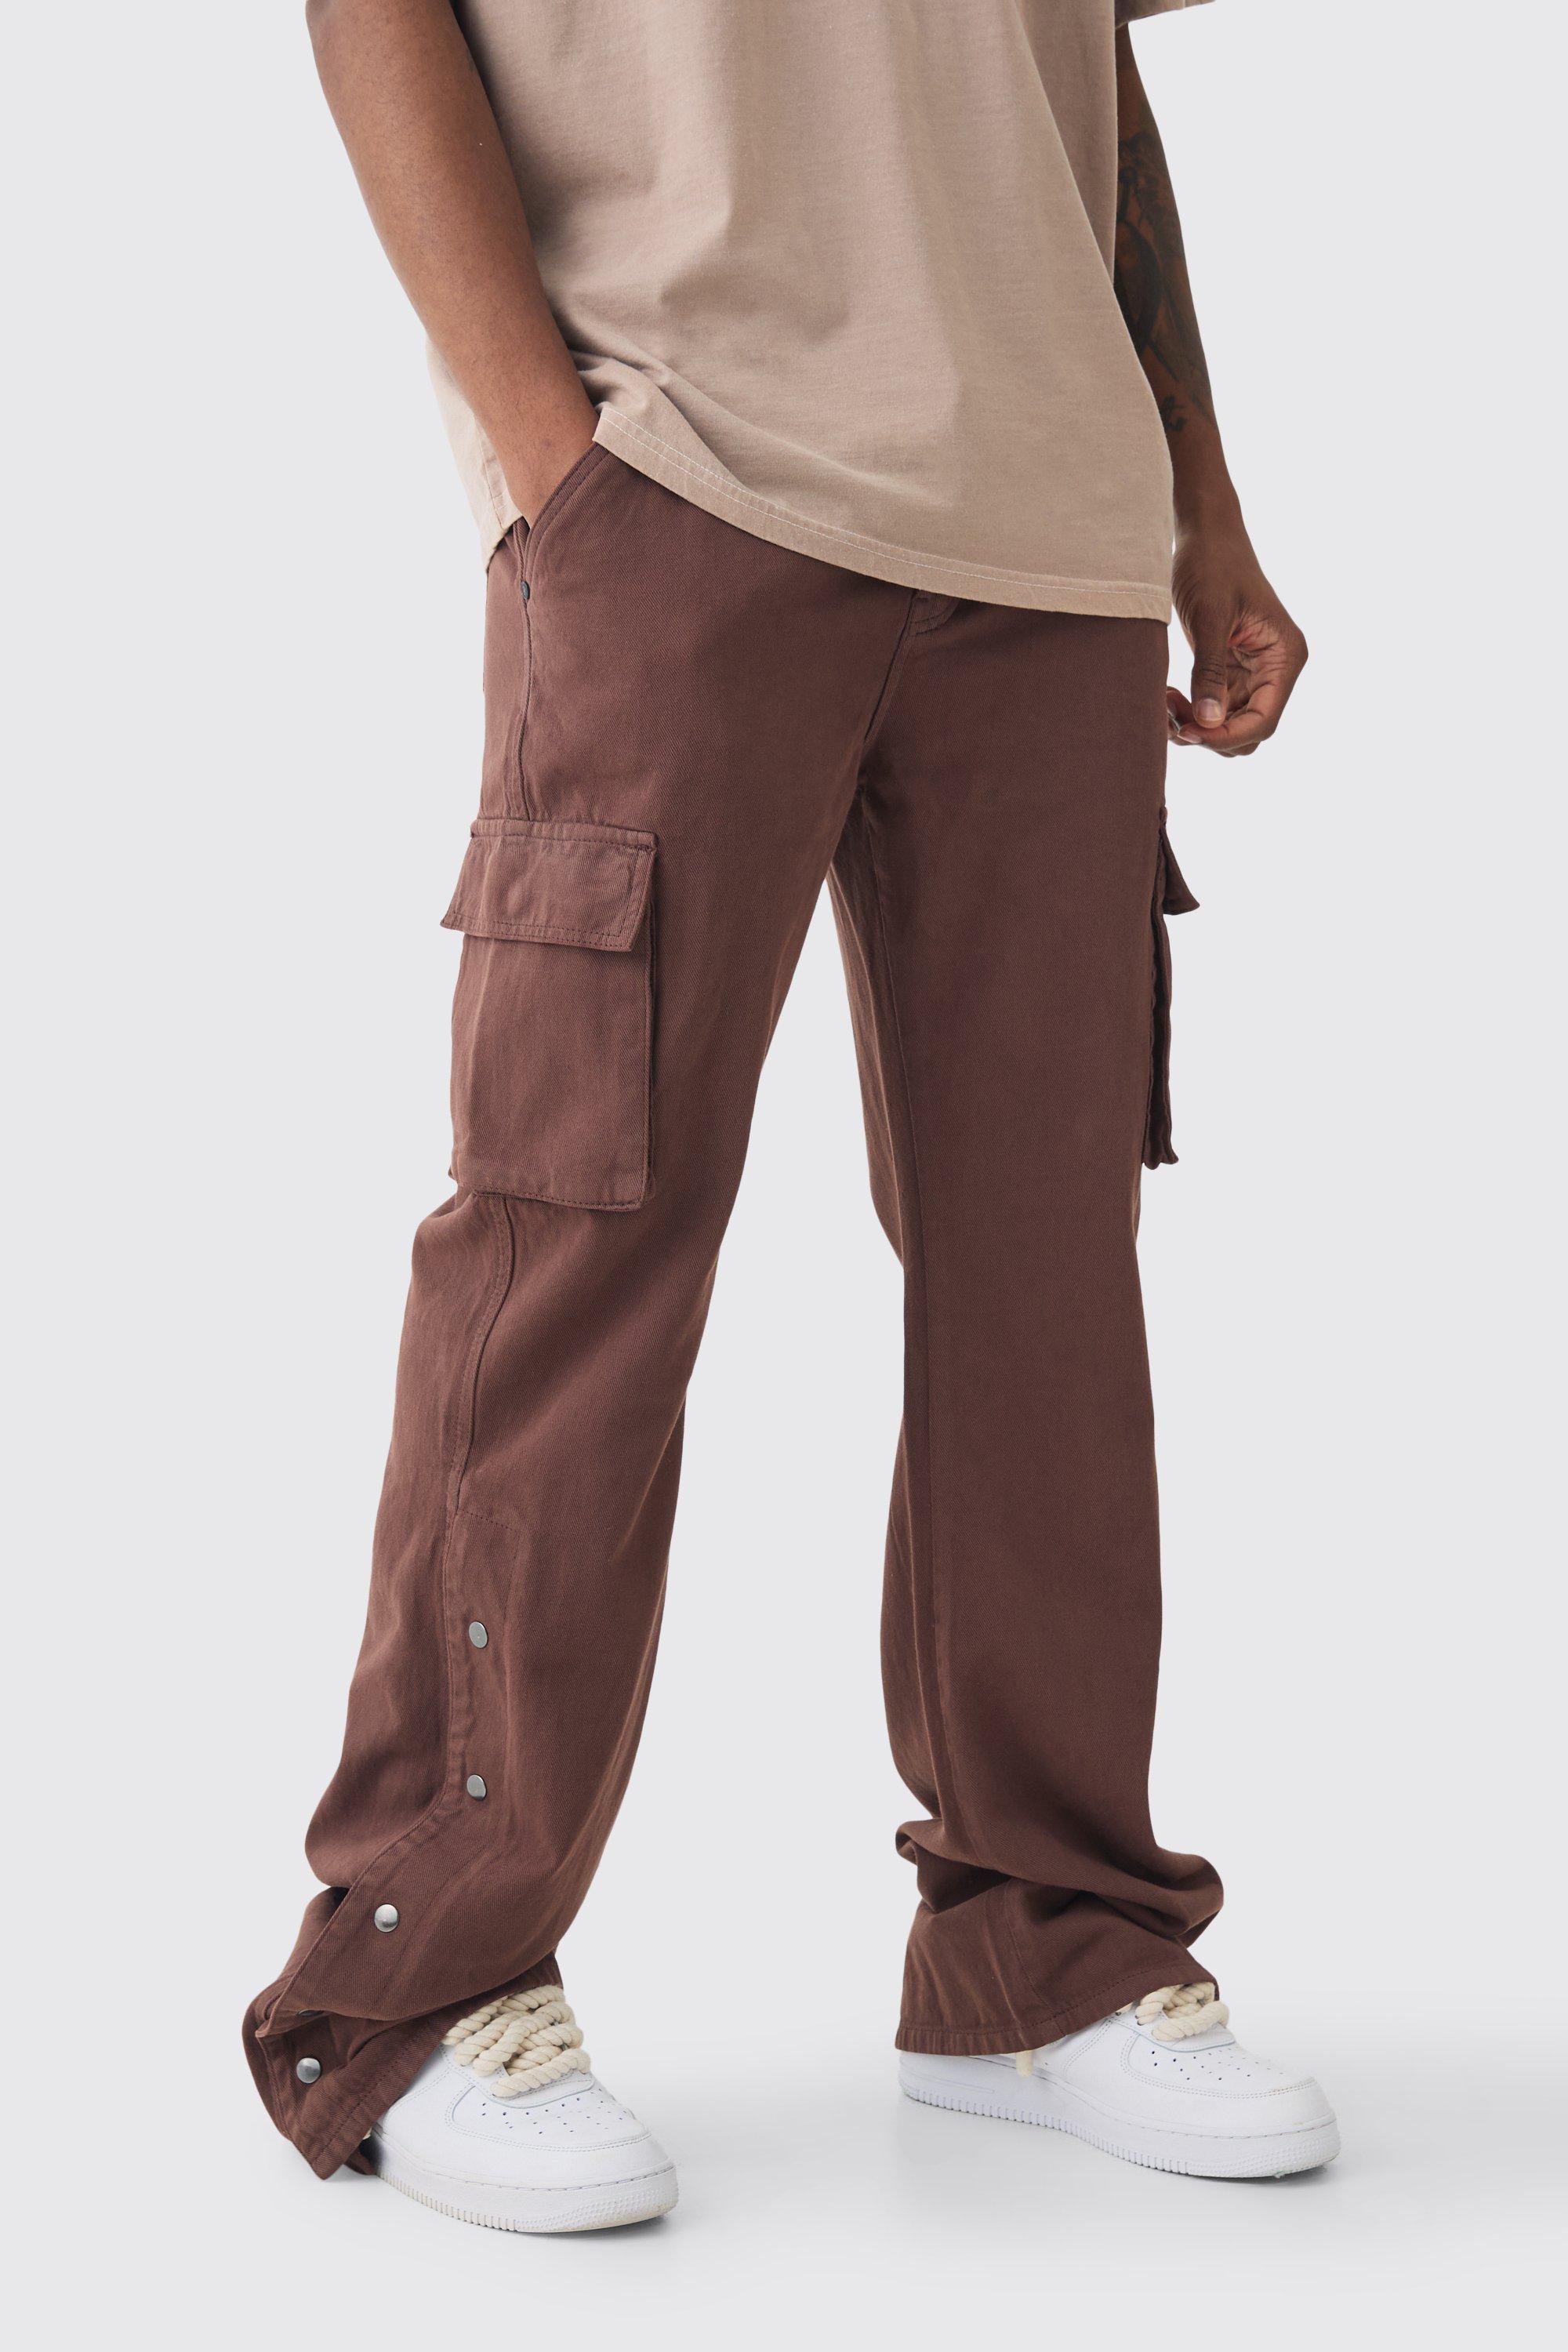 Boohoo Tall Relaxed Flare Overdye Popper Hem Cargo Trouser In Chocolate, Chocolate